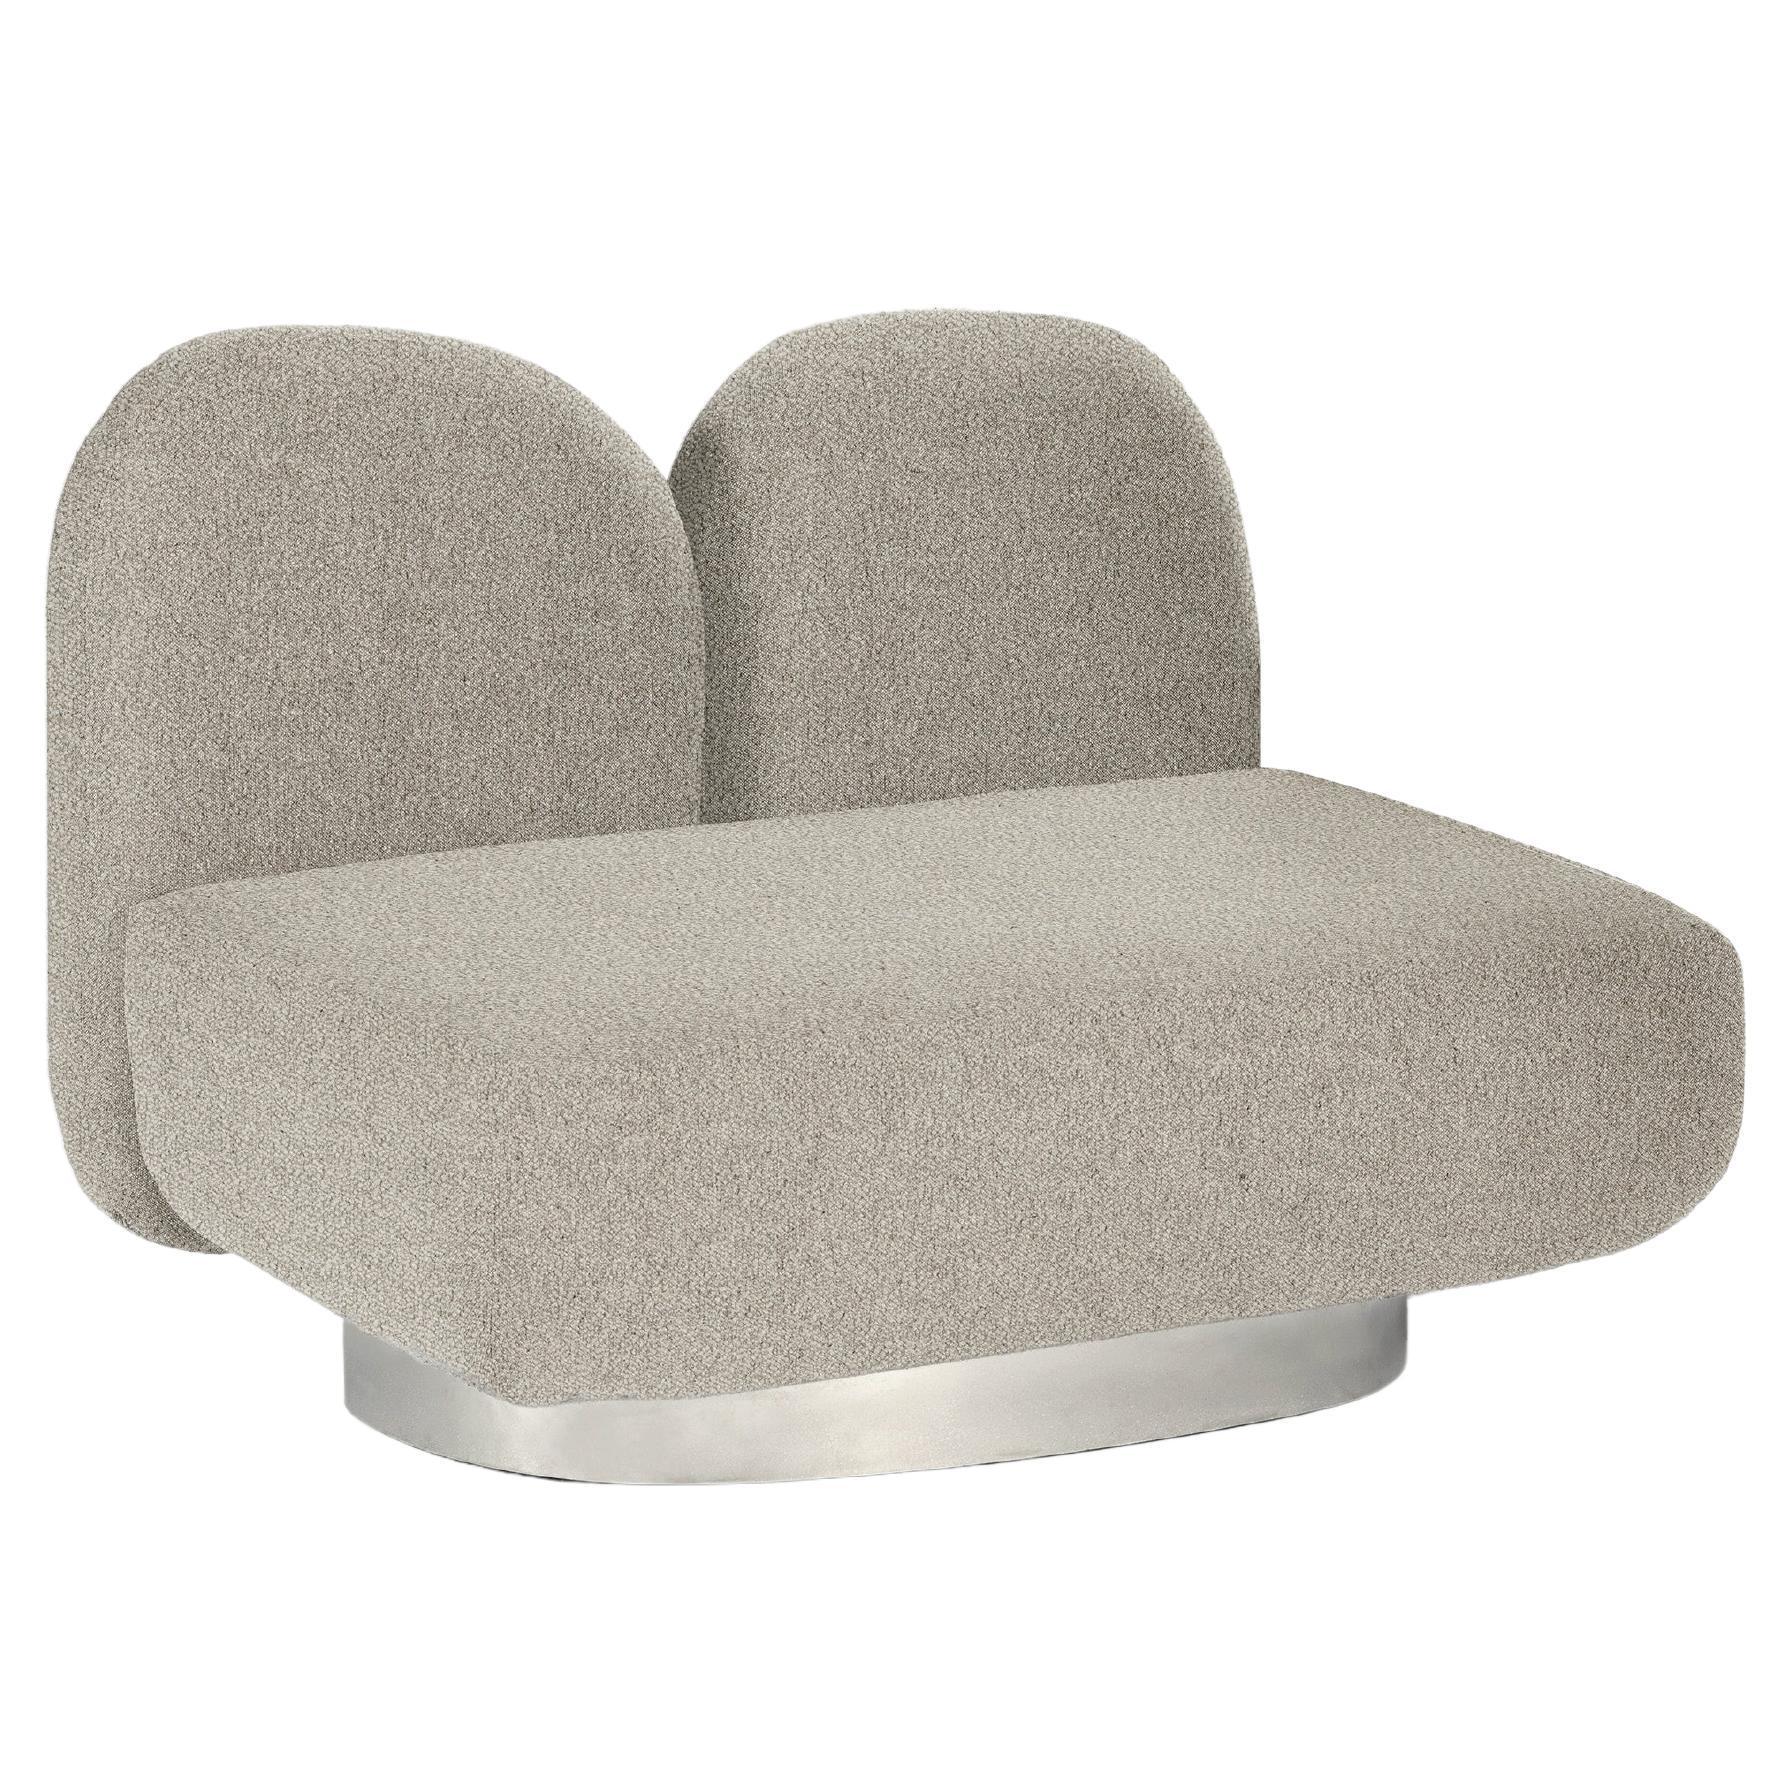 Contemporary Sofa 'Assemble' by Destroyers/Builders, 1 seater